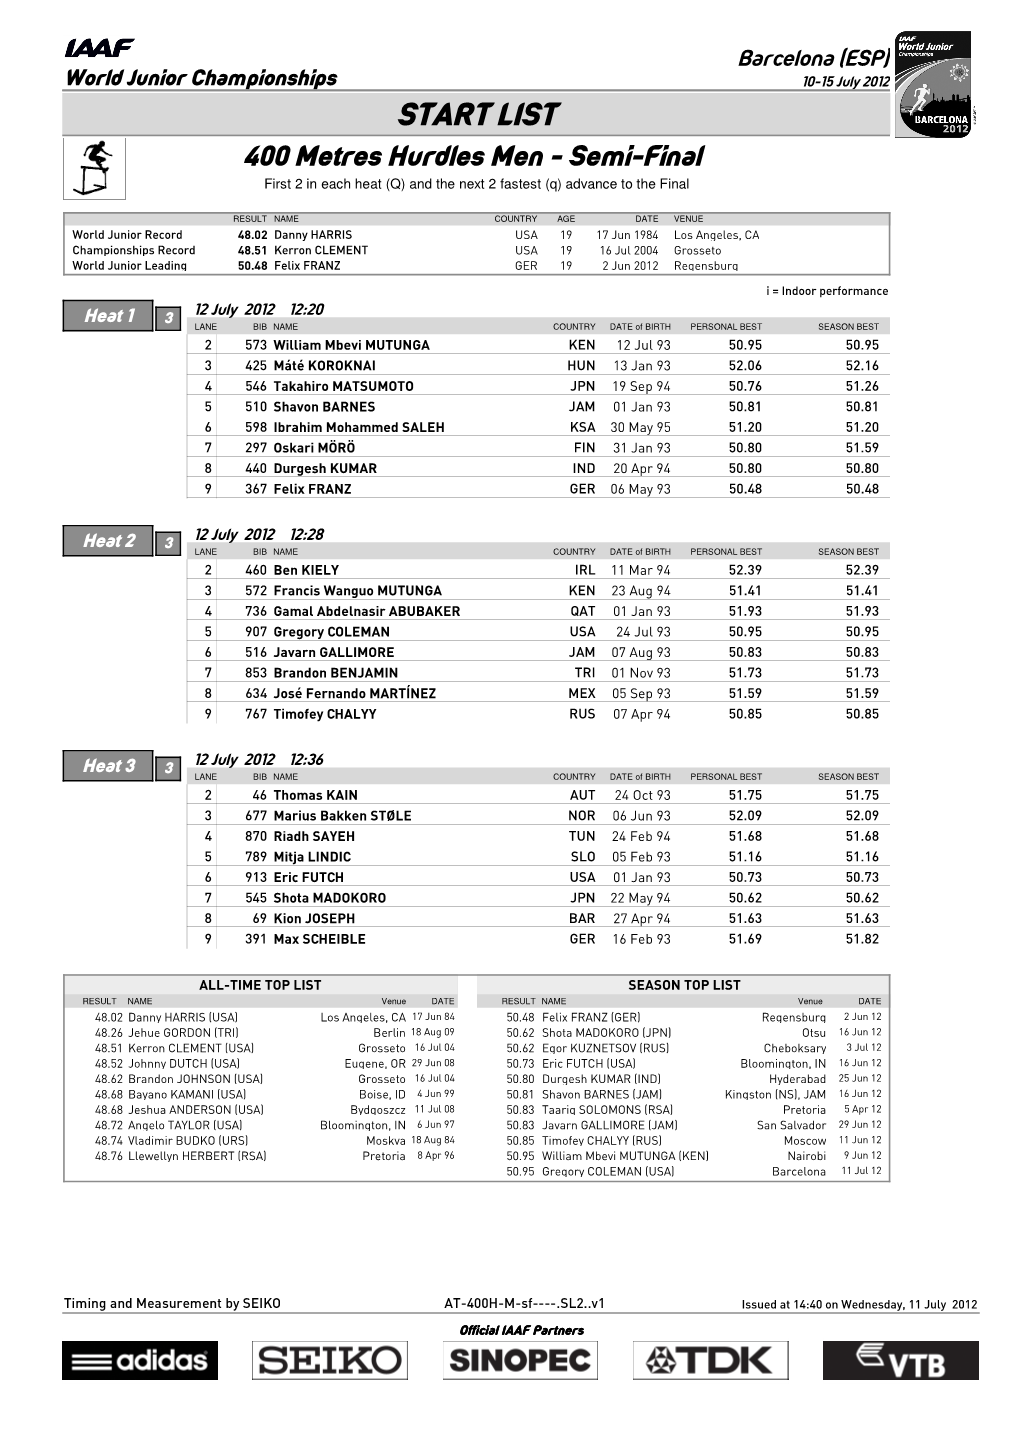 START LIST 400 Metres Hurdles Men - Semi-Final First 2 in Each Heat (Q) and the Next 2 Fastest (Q) Advance to the Final